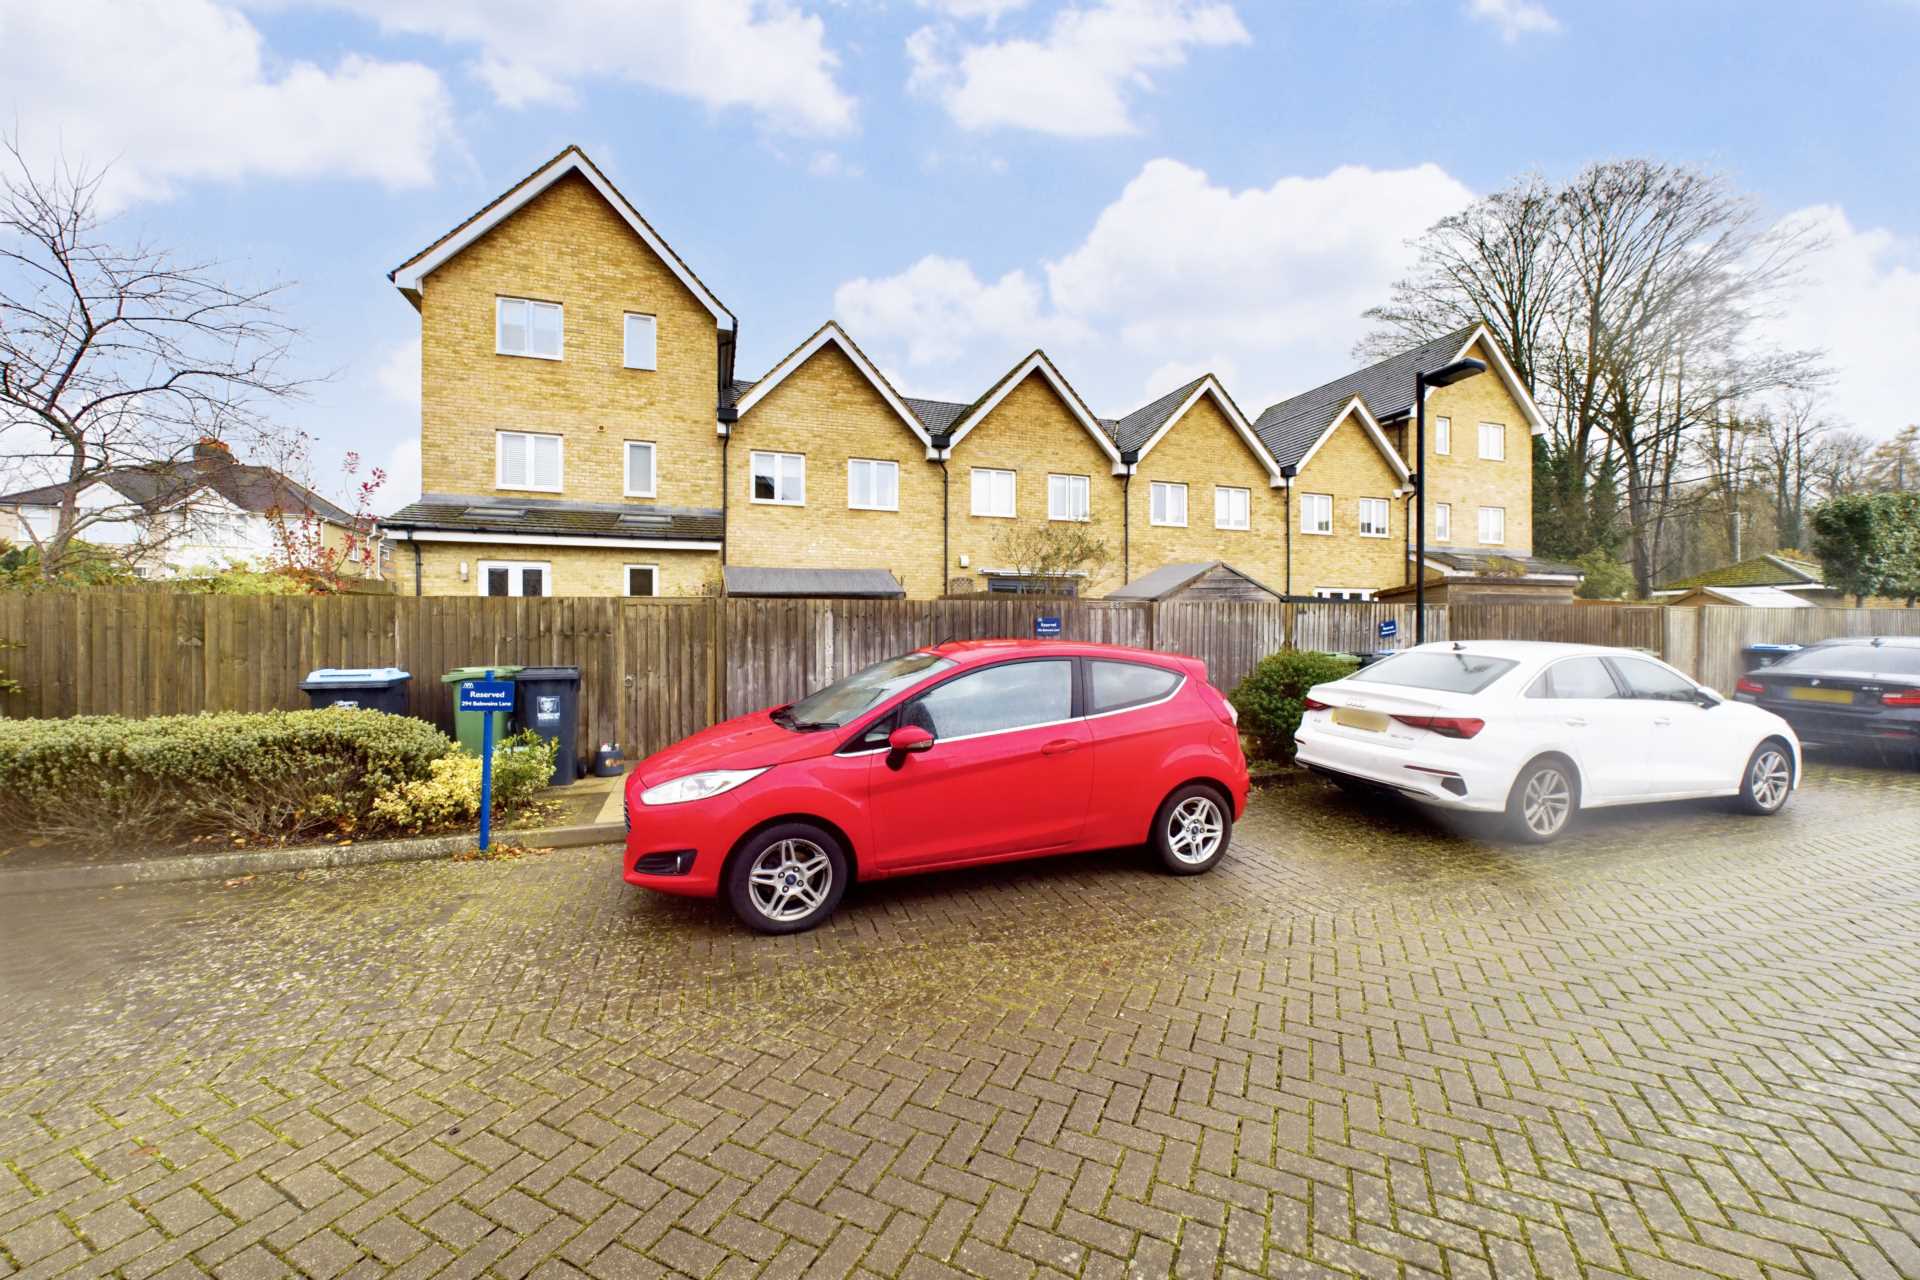 Belswains Lane, Hemel Hempstead, Unfurnished, Available From 20/01/24, 6 Month Initial Let, Image 5